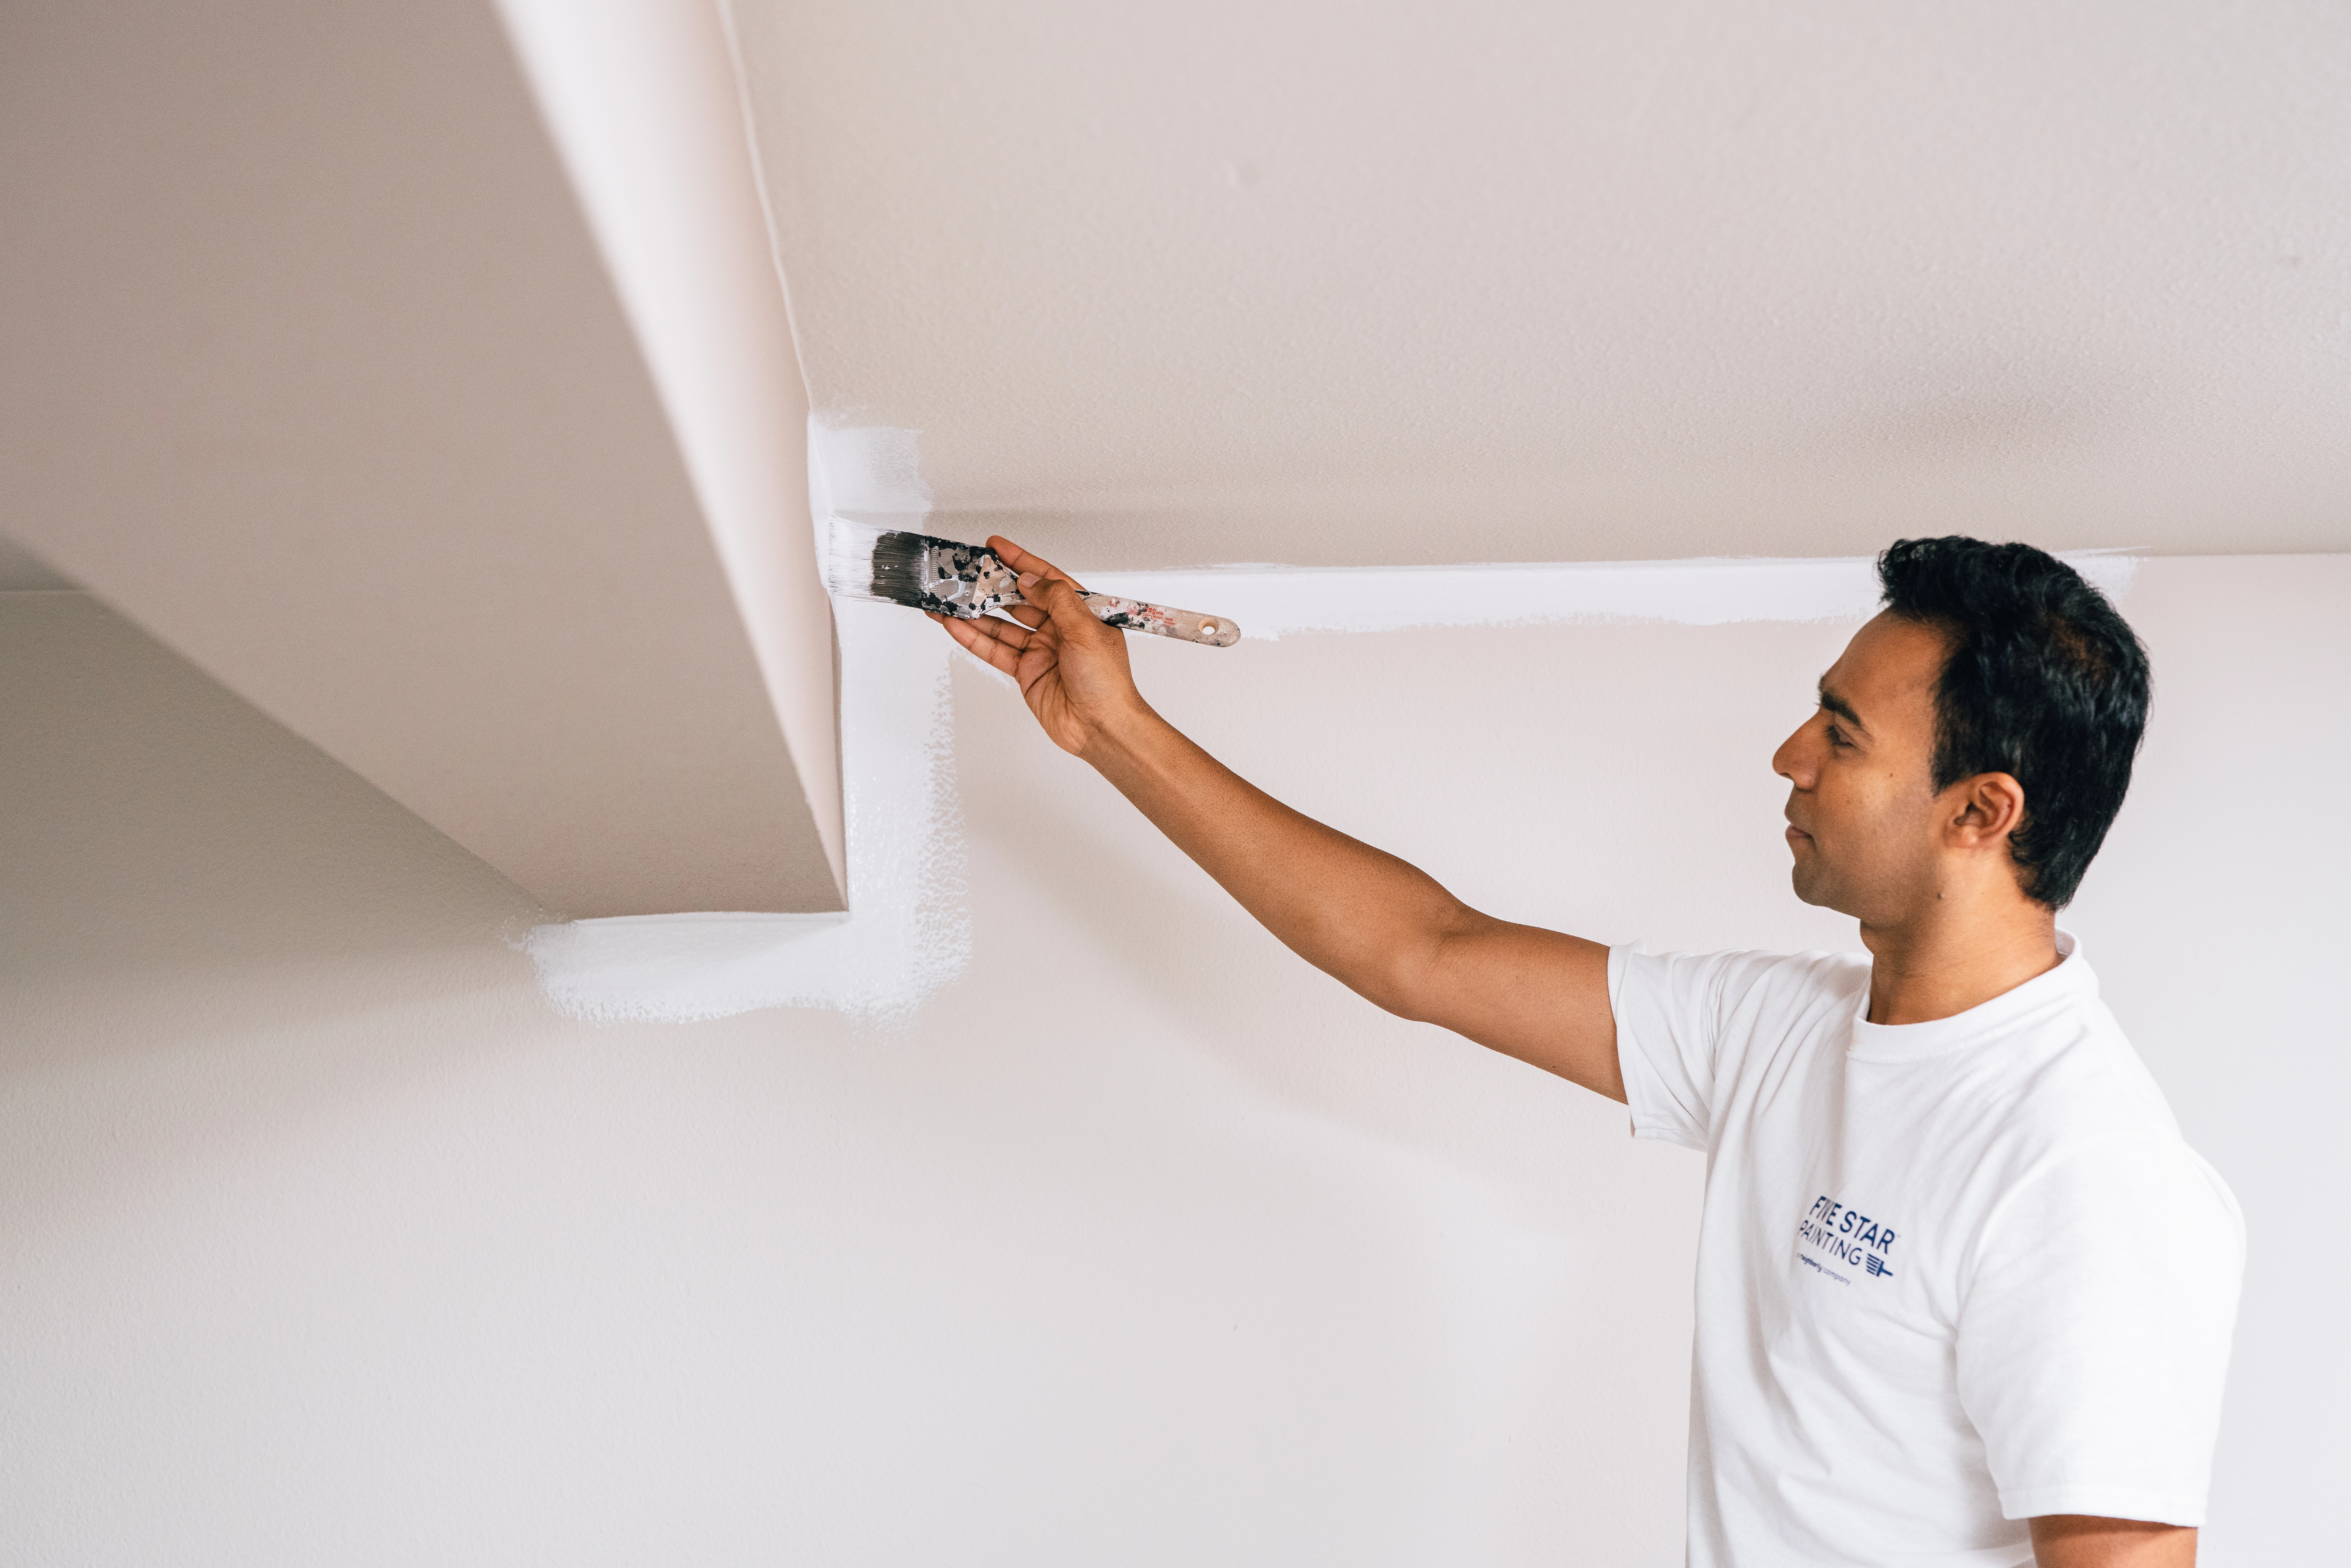 A Five Star Painting employee is painting the perimeter of a ceiling beam in a basement white. 